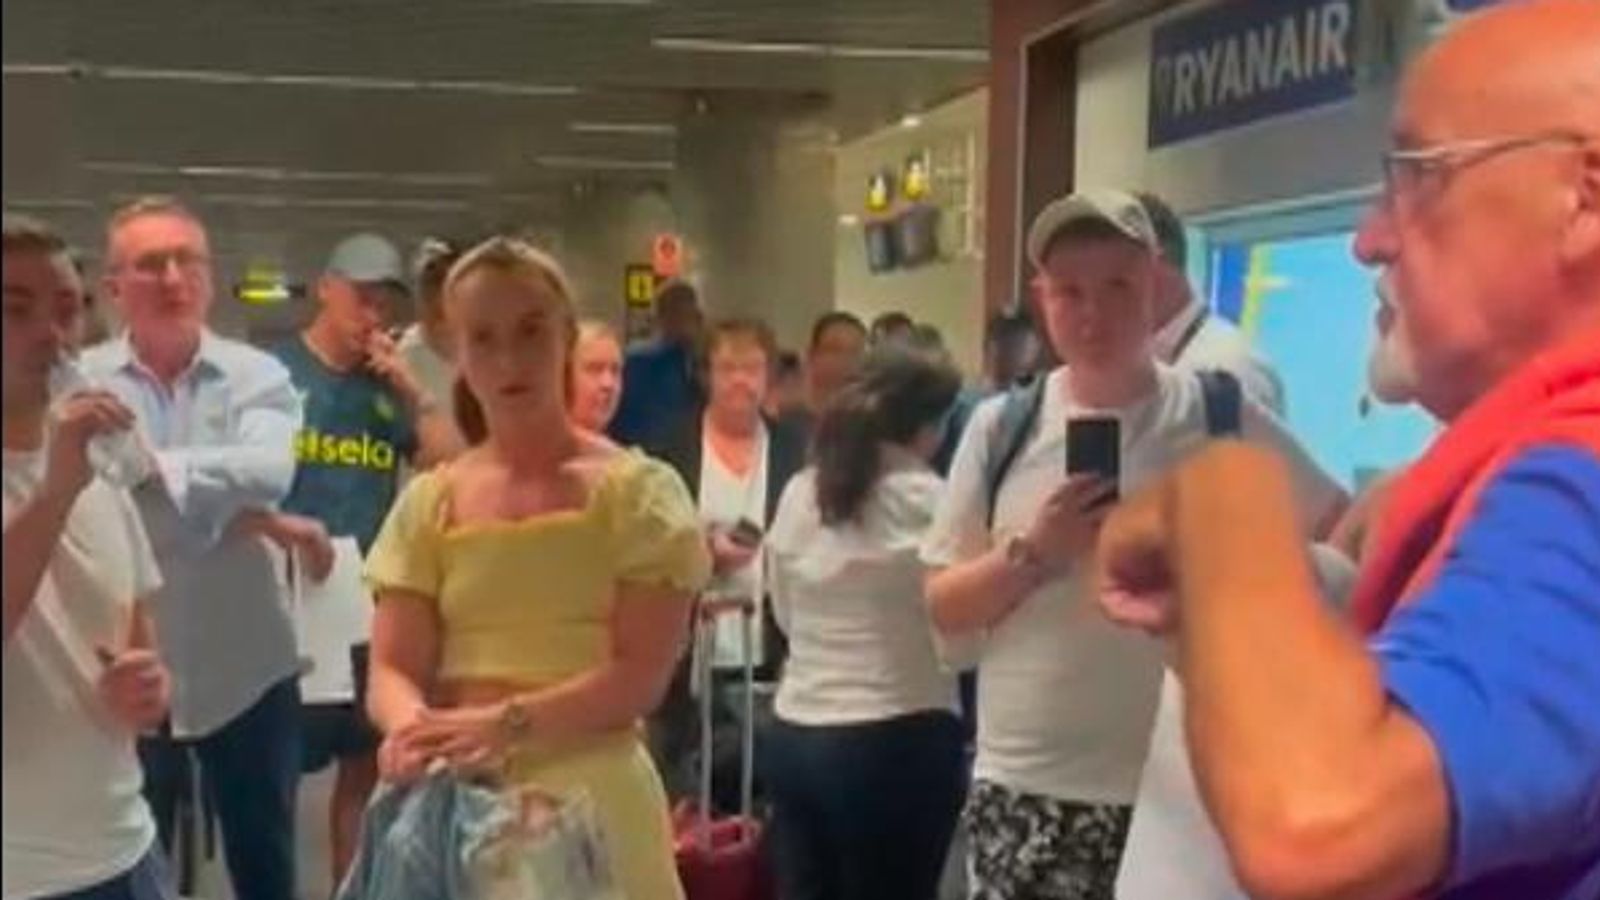 Air traffic control chaos: Hundreds of passengers left 'stranded' in 'absolutely shocking' conditions